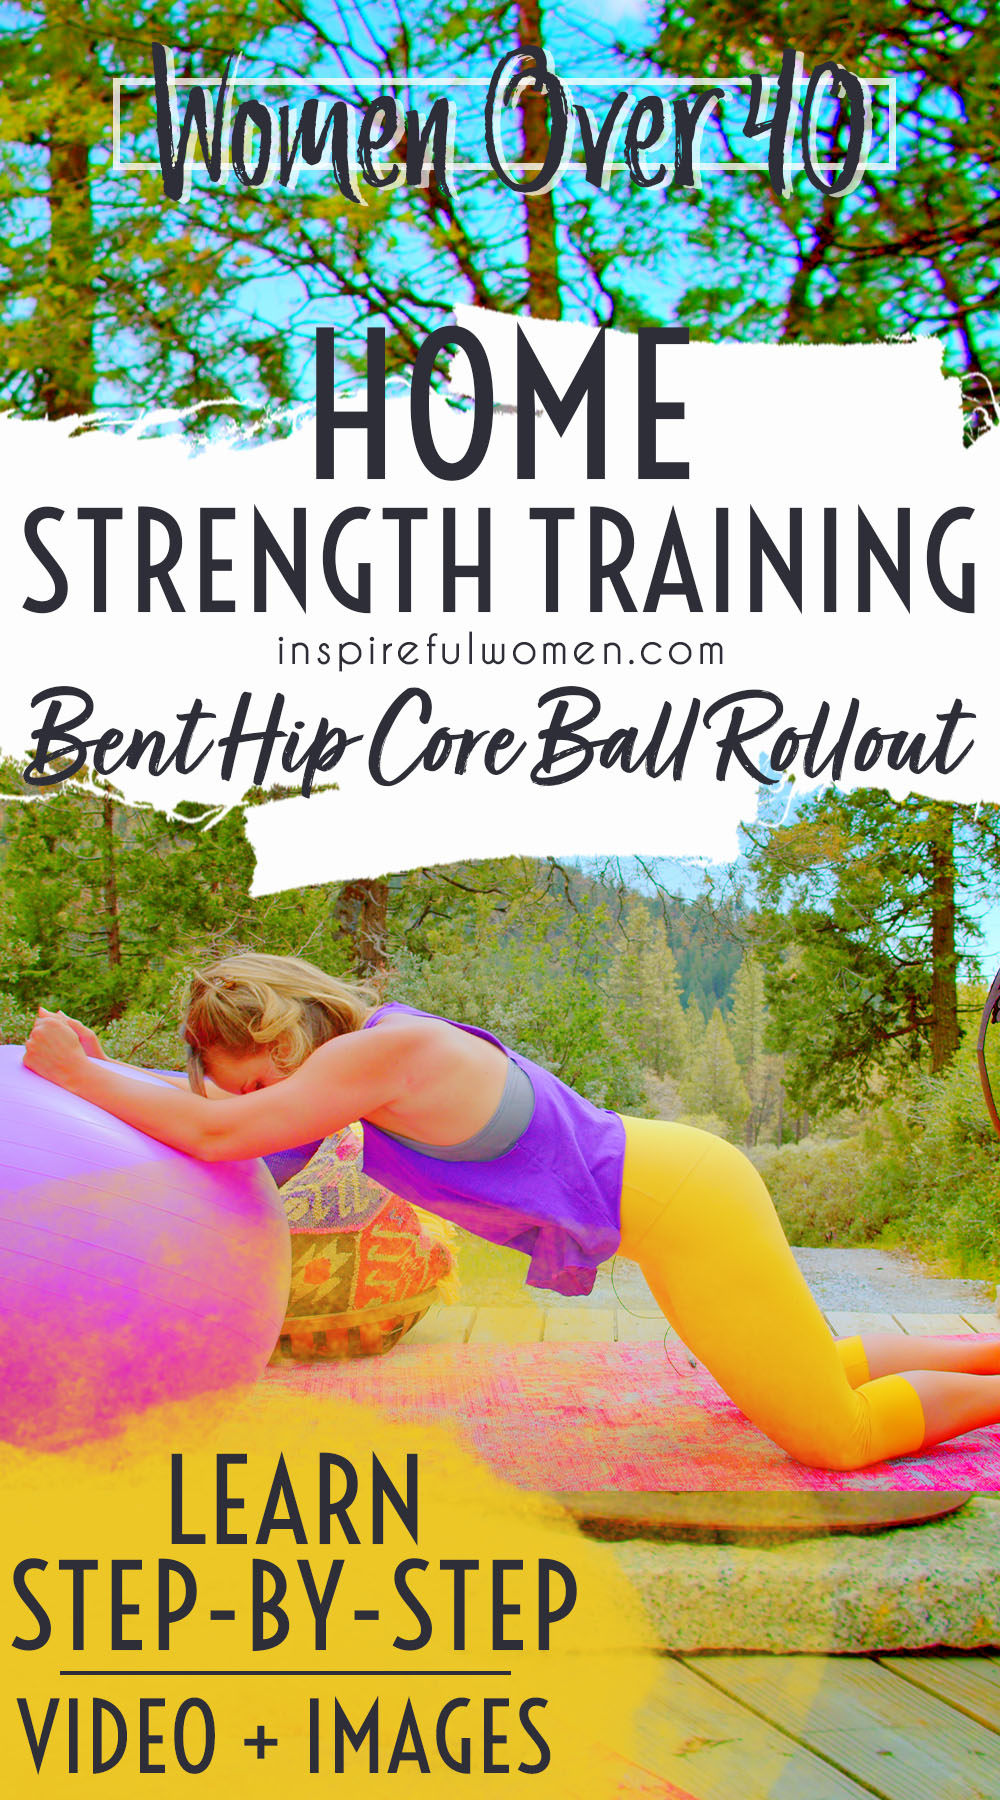 bent-hip-stability-ball-rollouts-bodyweight-core-exercise-rectus-abdominus-erector-spinae-women-above-40